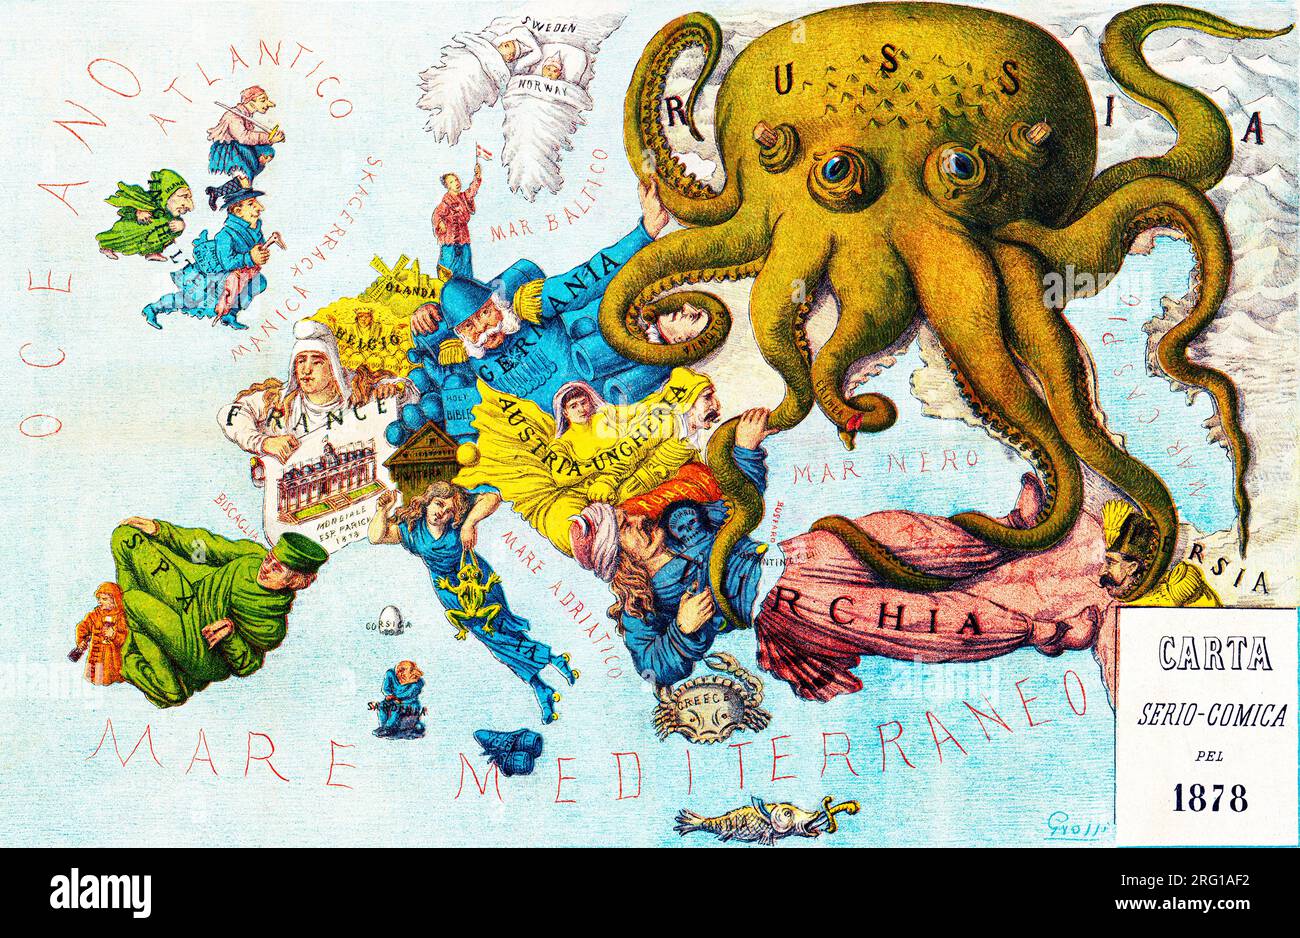 Papagallo no.15 la Piovra Russa Anno VI by Augusto Grossi , a cartoon depiction of Europe in 1878, using caricatures and monster kraken. Original from Stock Photo